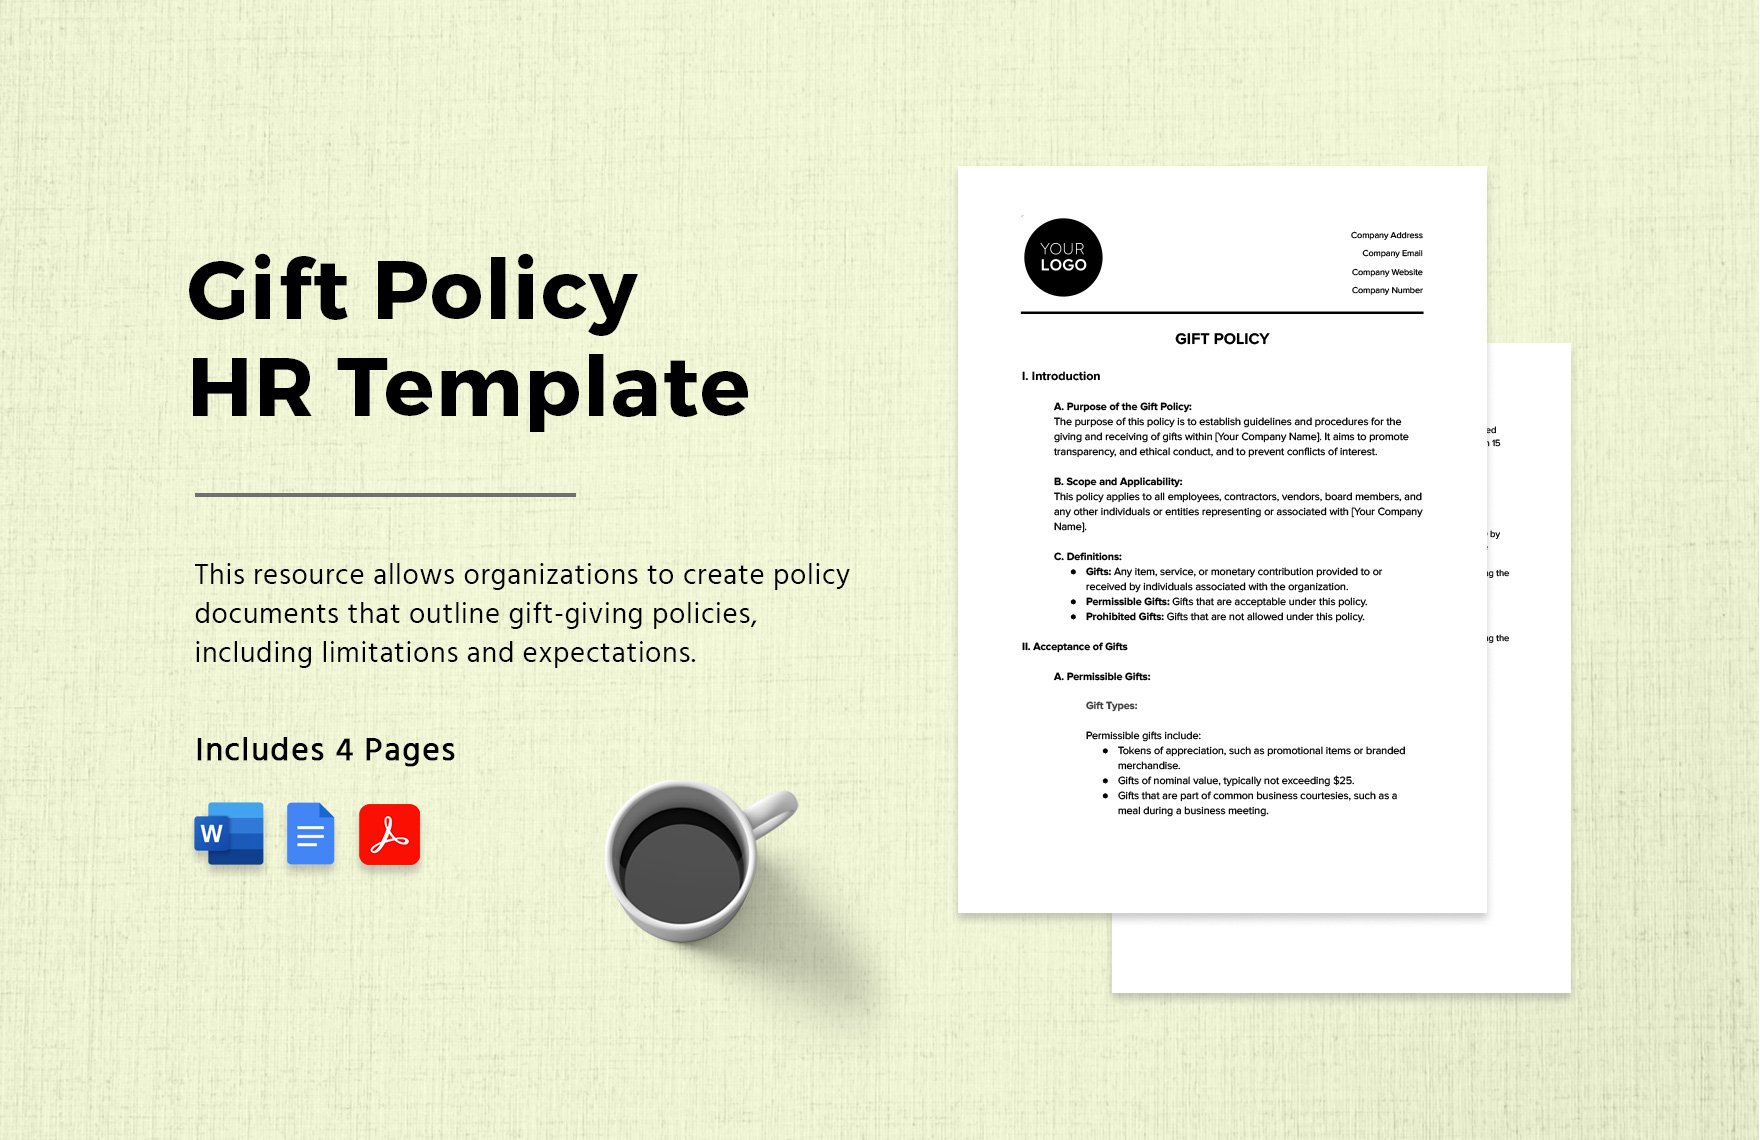 Gift Policy HR Template